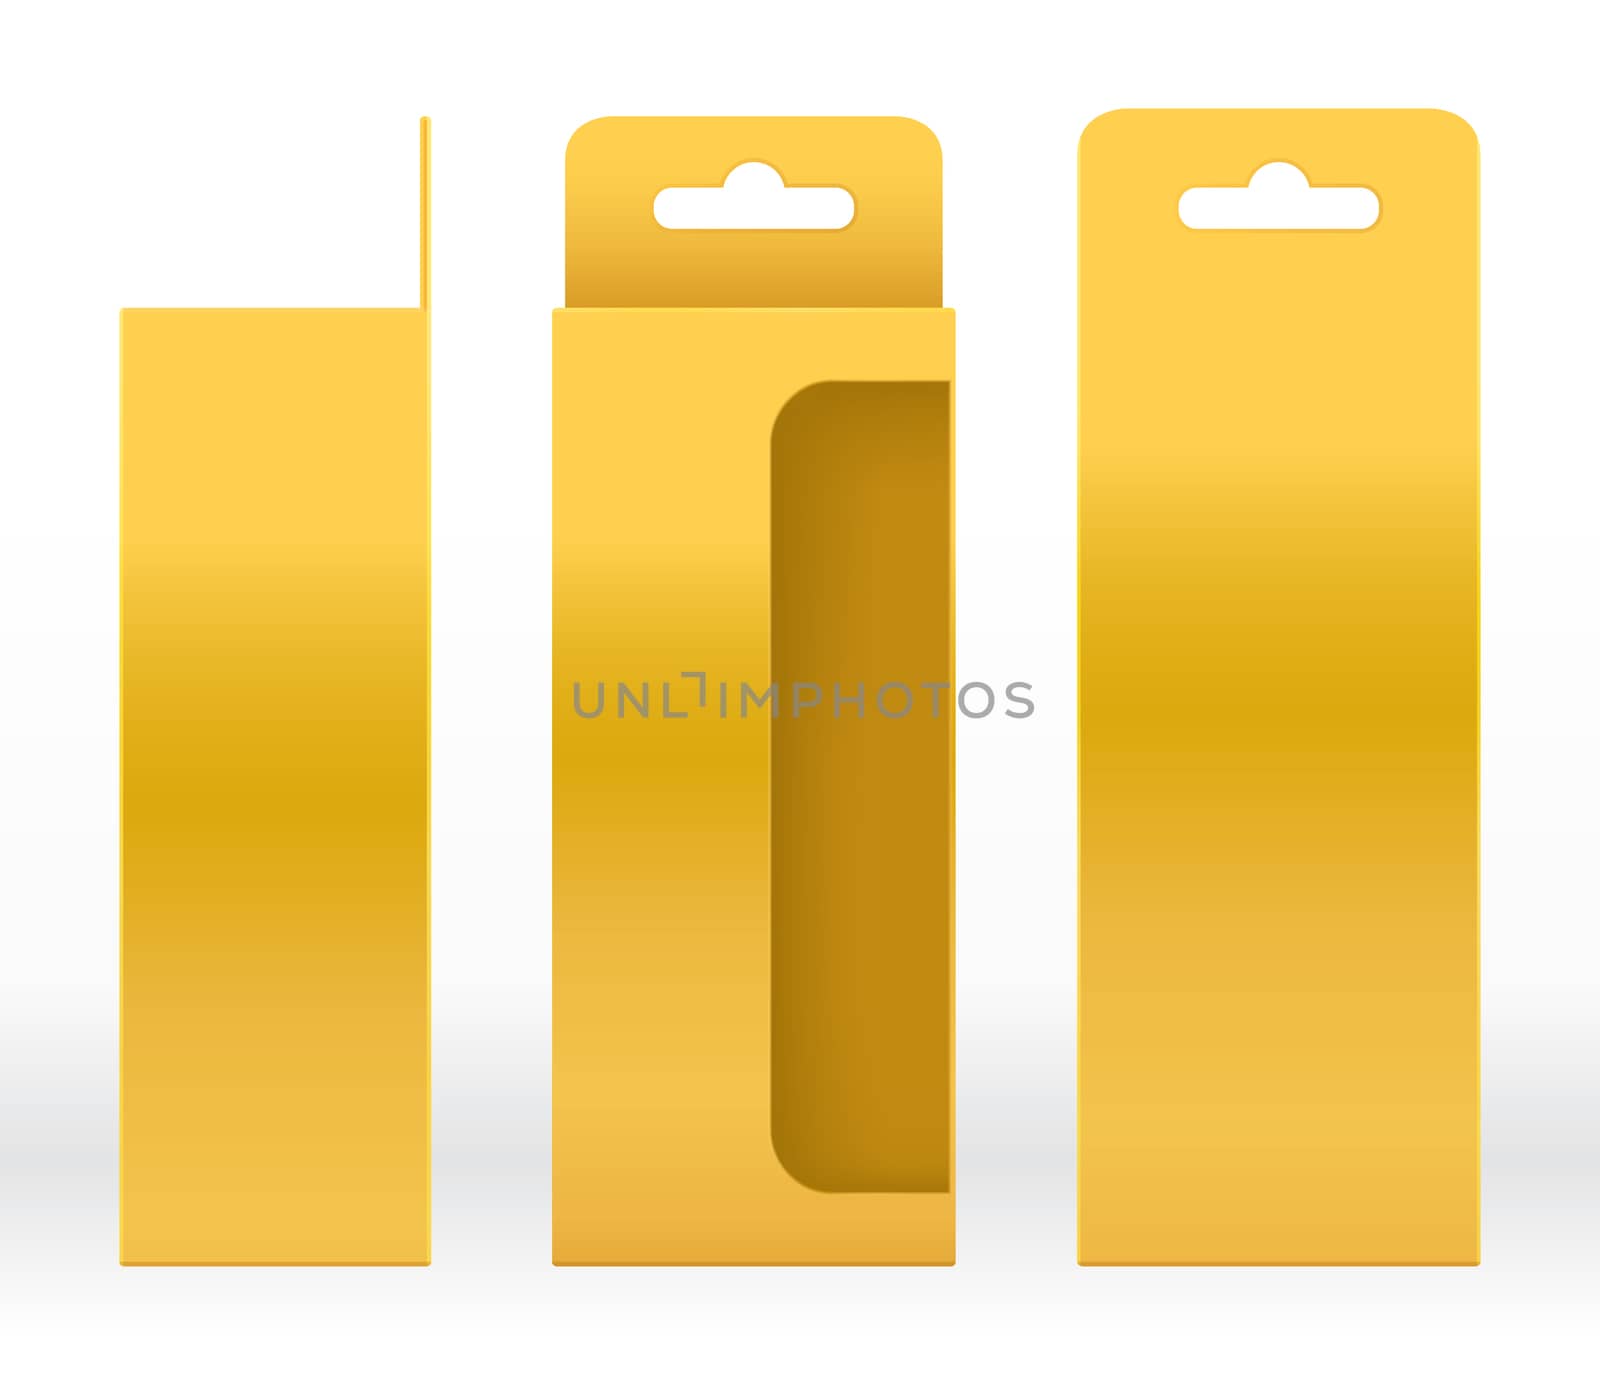 Hanging Box Gold window shape cut out Packaging Template blank. Luxury Empty Box Golden Template for design product package gift box, Gold Box packaging paper kraft cardboard package